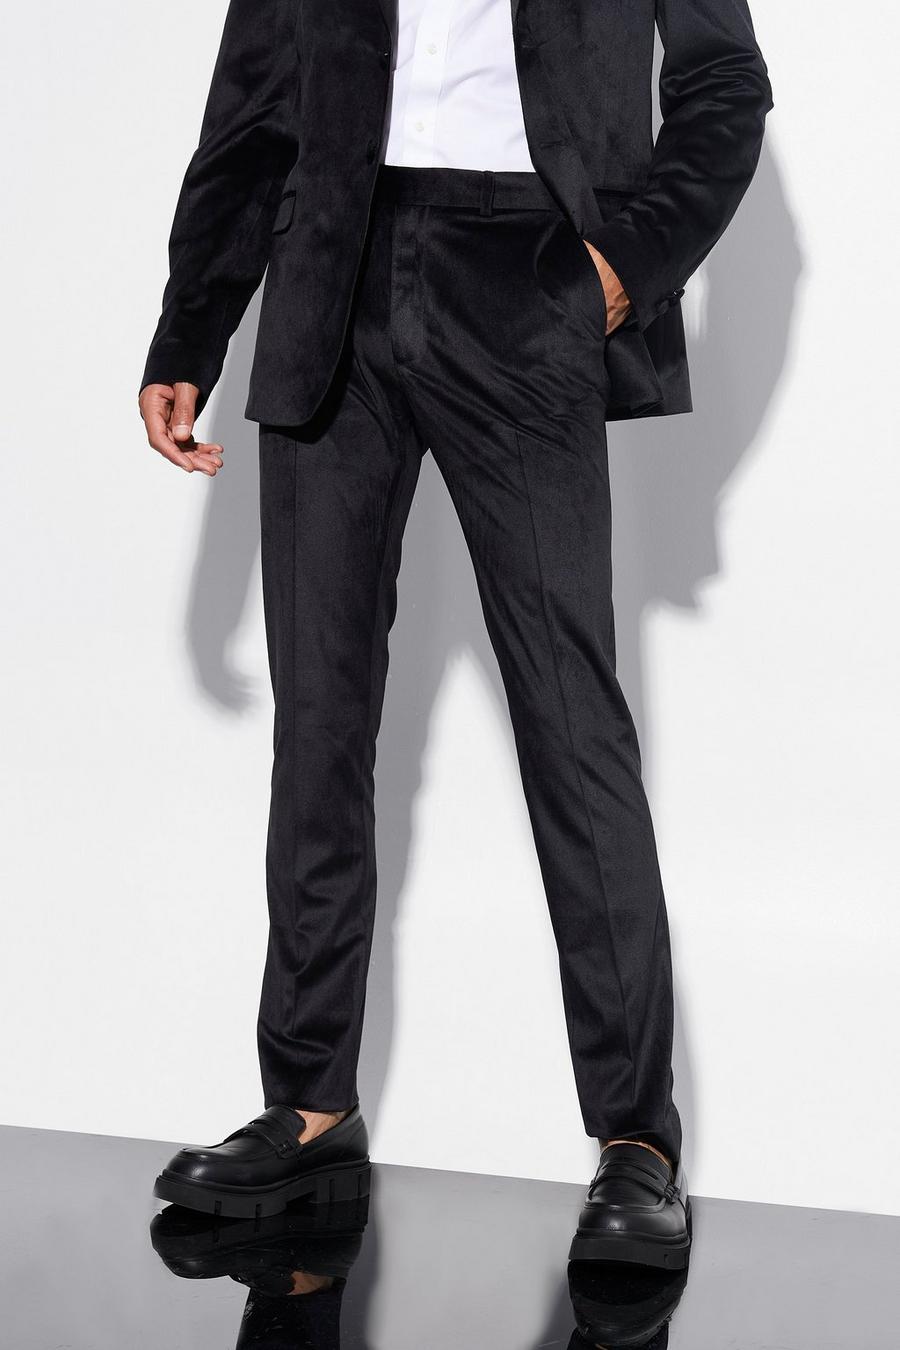 Black Tall Skinny Velour Suit Trousers